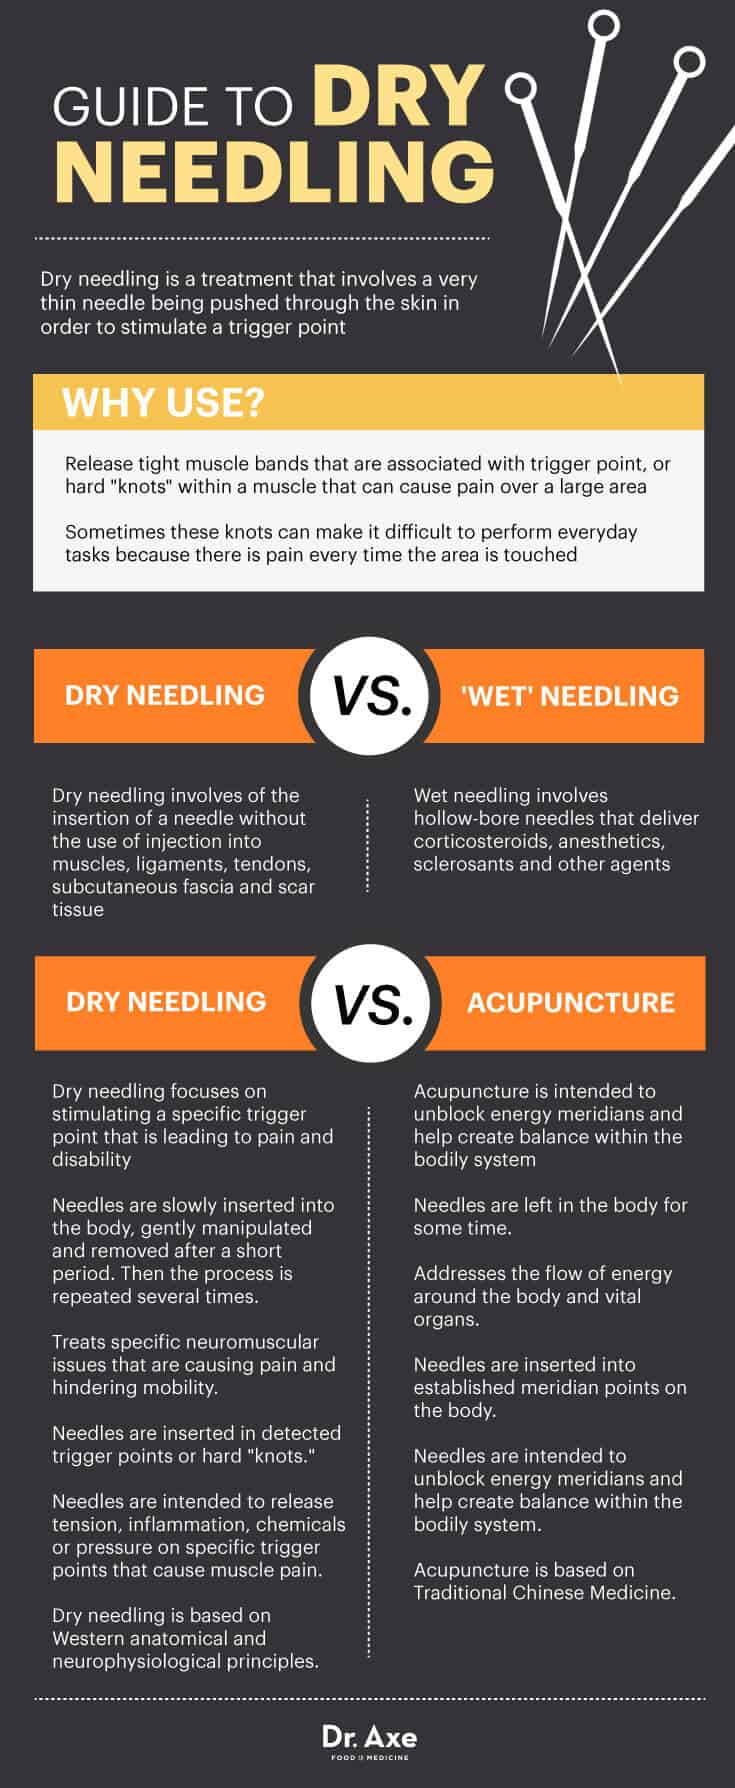 Guide to dry needling - Dr. Axe